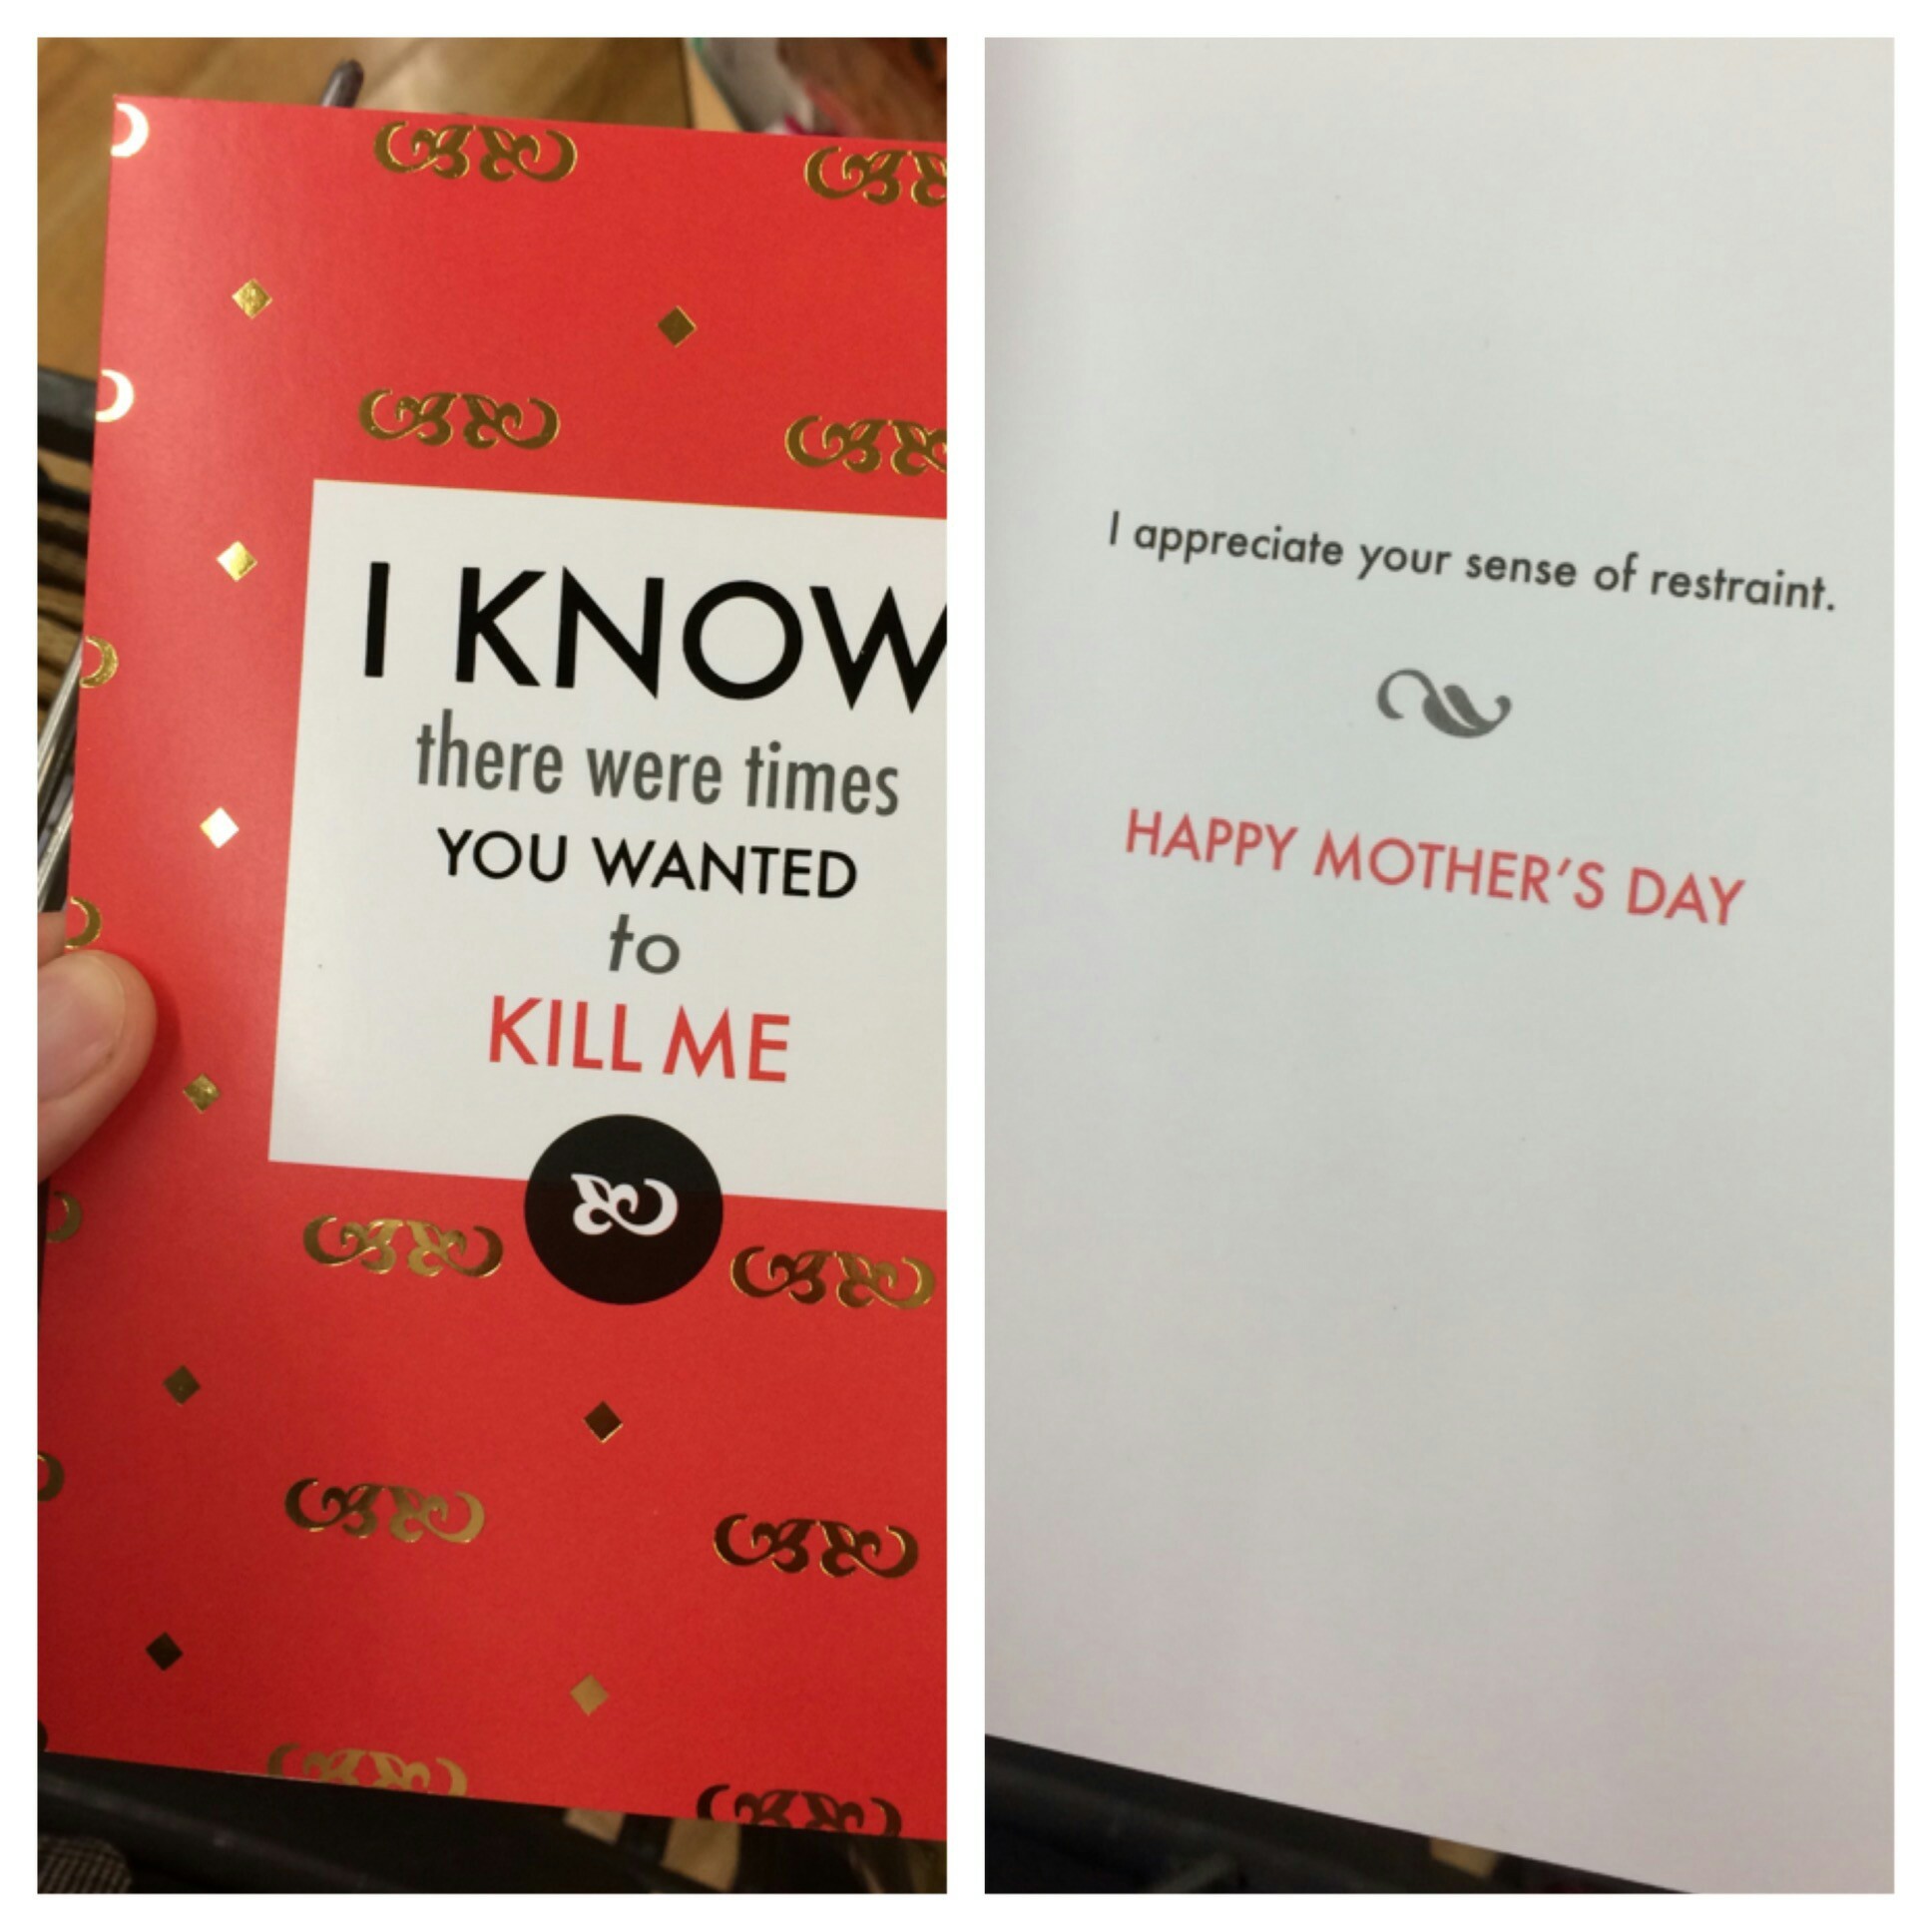 So what did you get for your Mother ? - meme